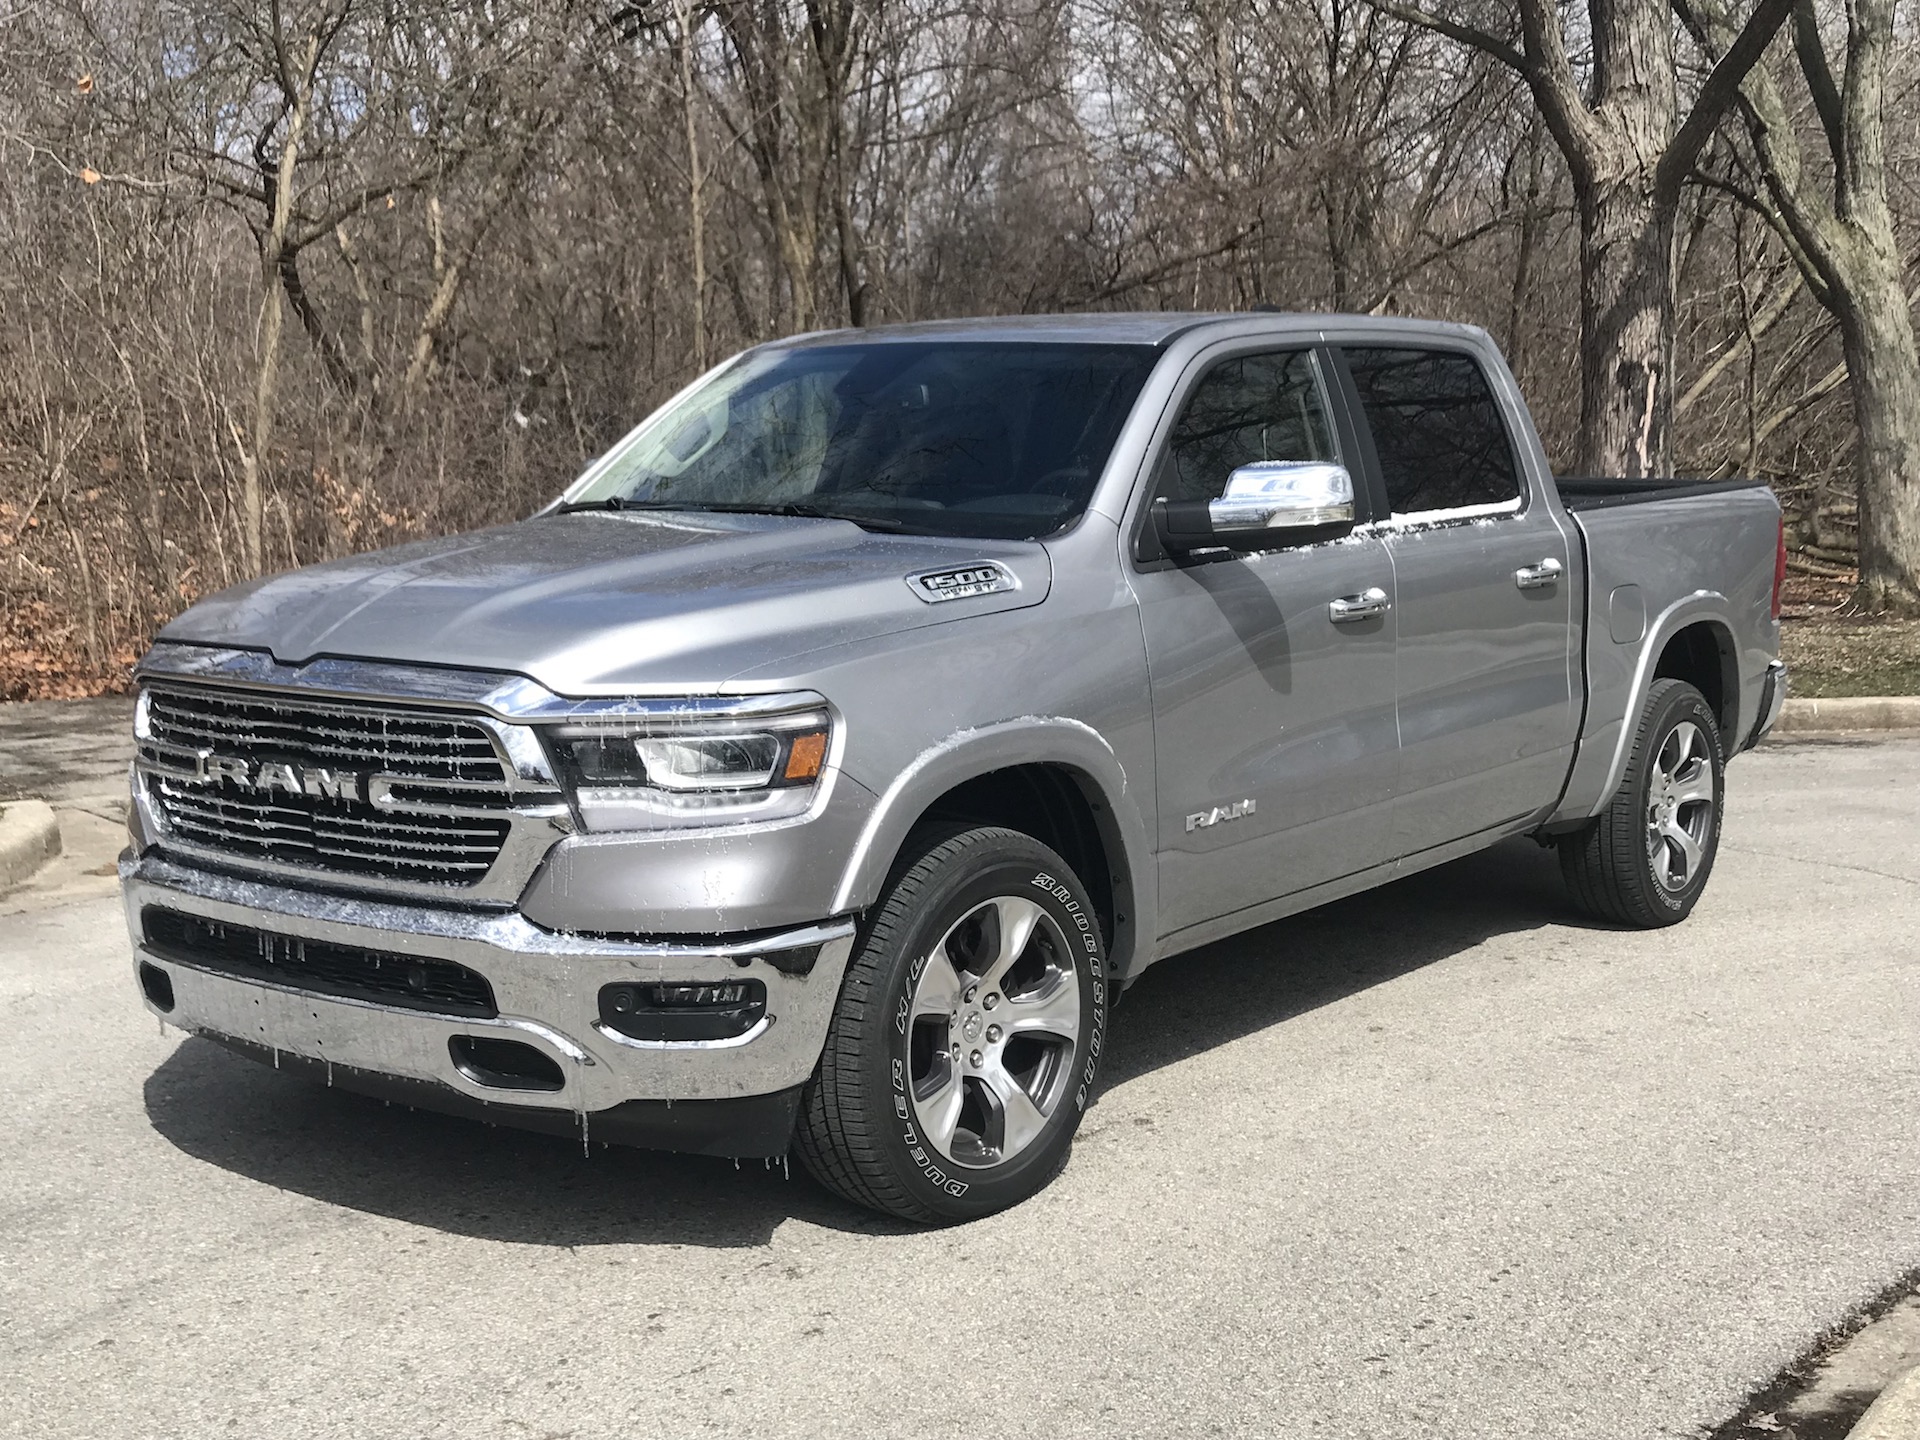 Living and working with Ram 1500